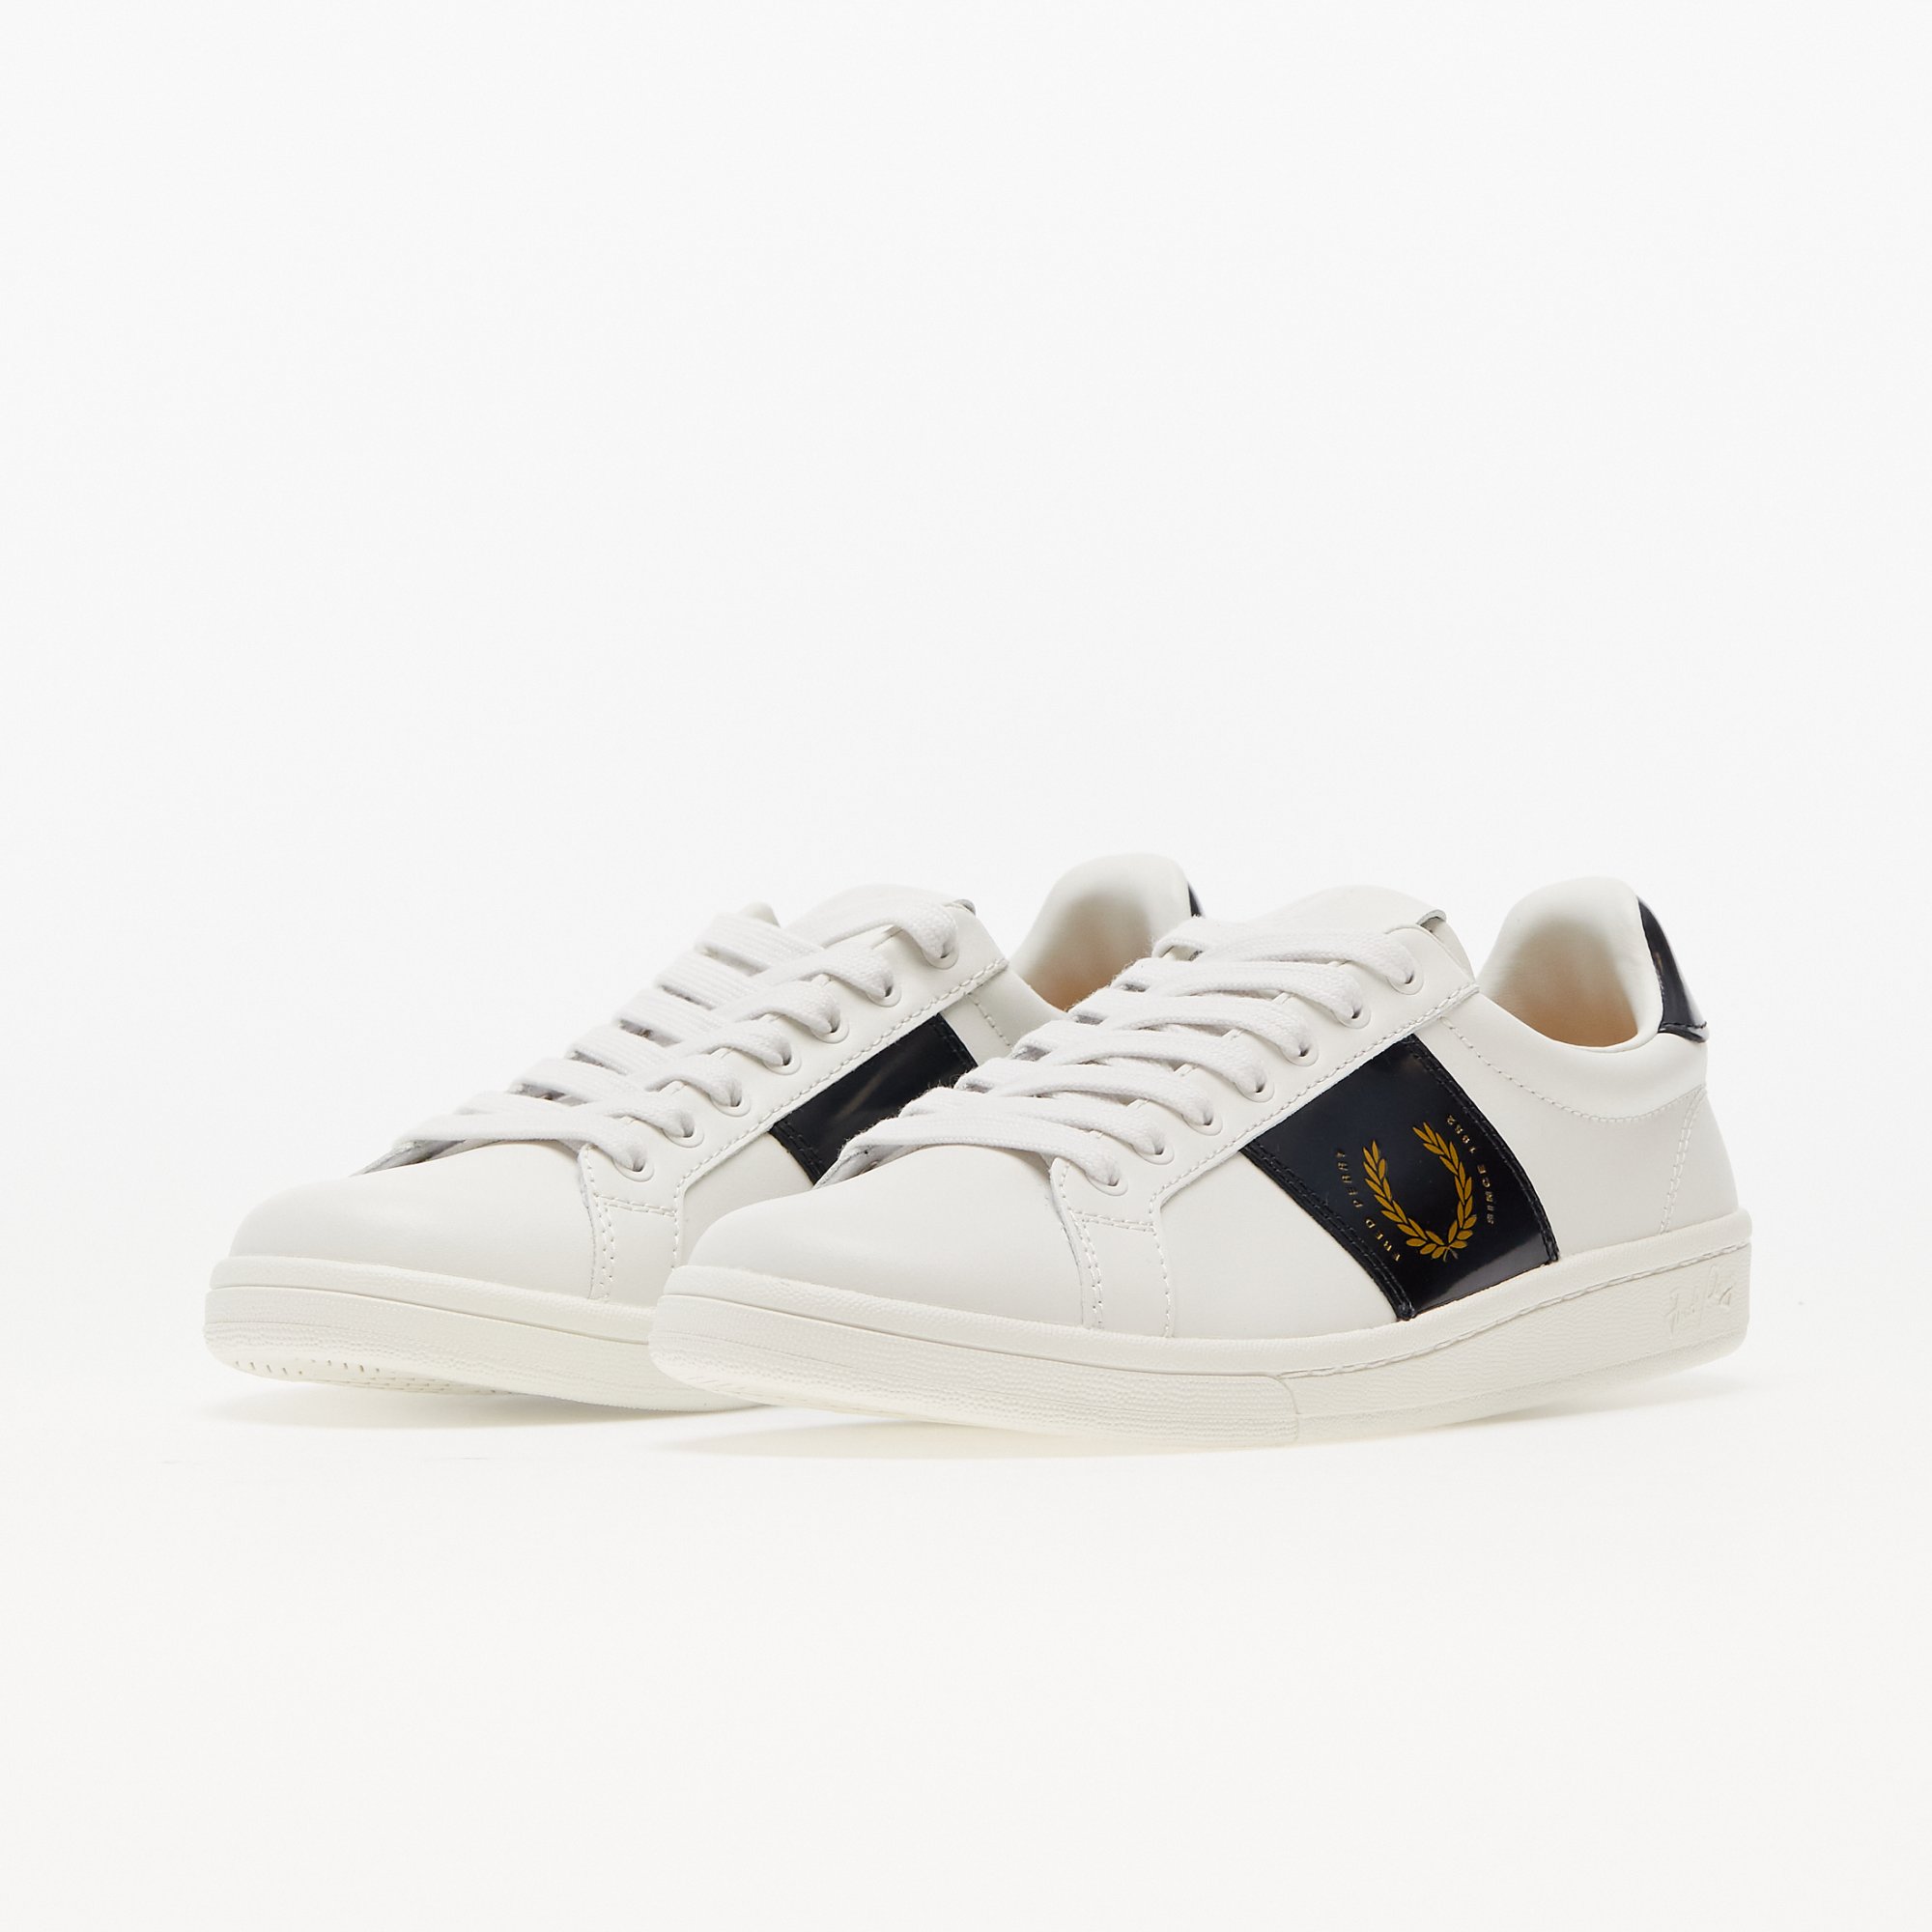 FRED PERRY Leather/ Branded Porcelain Fred Perry